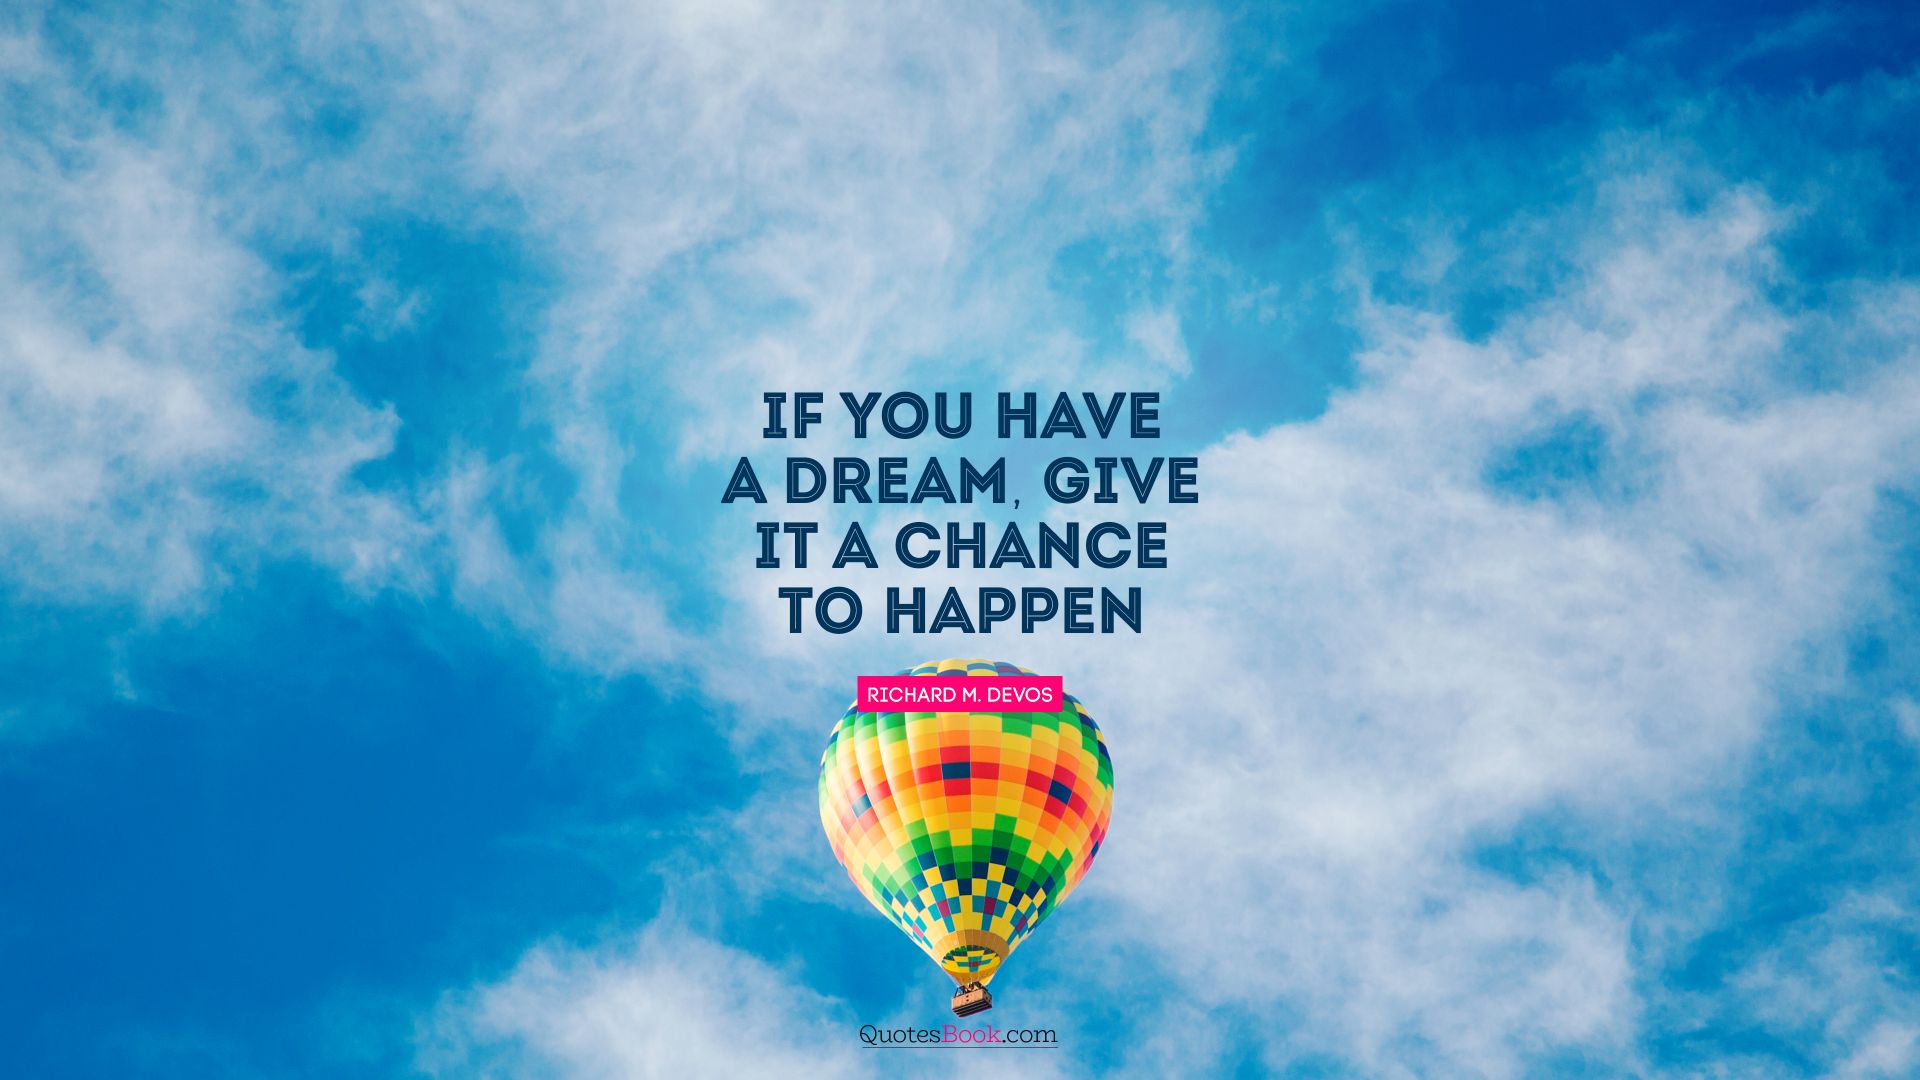 If you have a dream, give it a chance to happen. - Quote by Richard M. DeVos